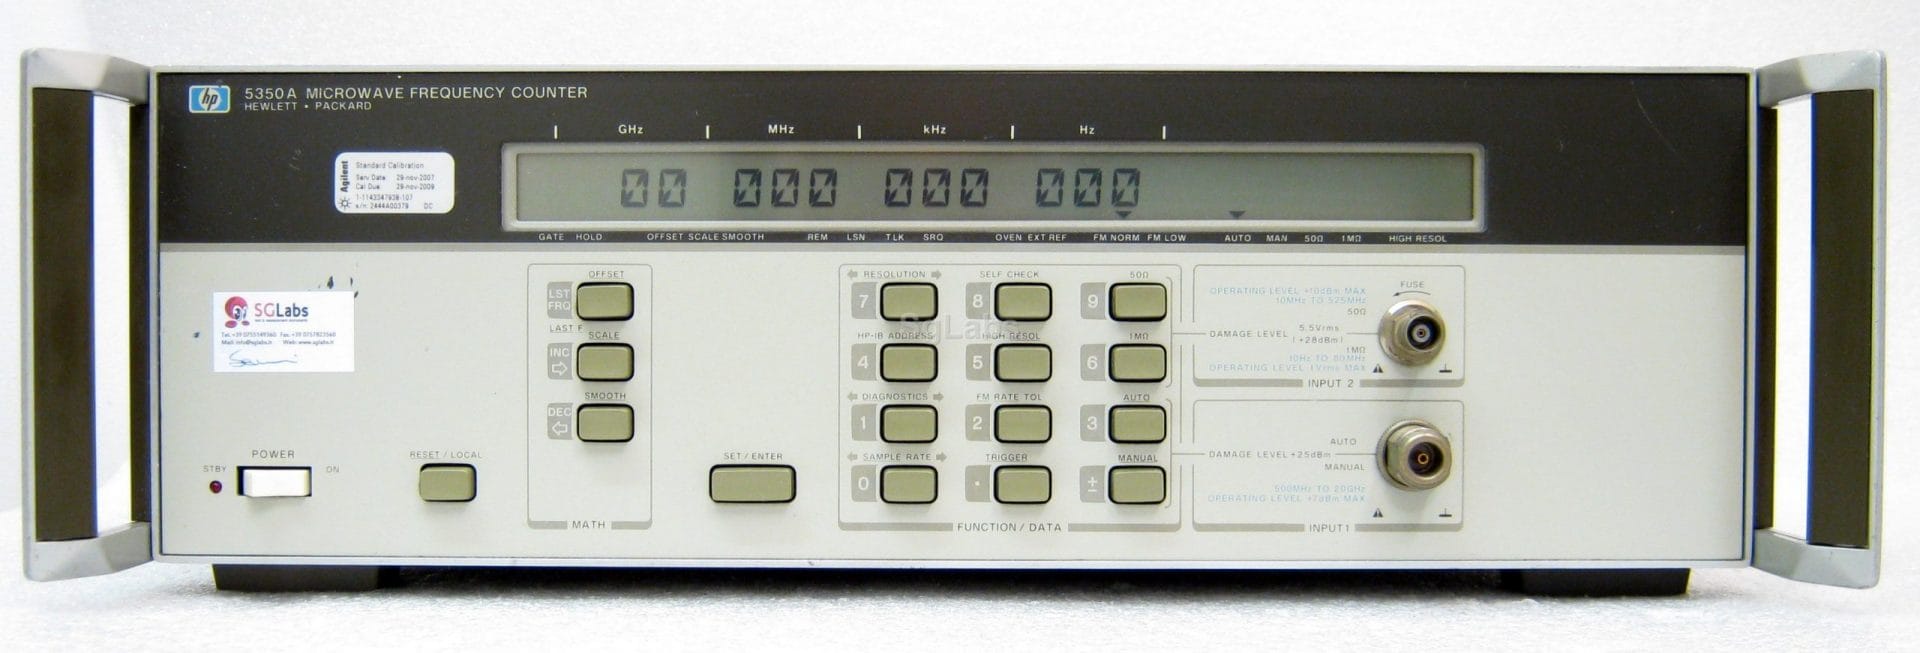 Agilent 5350A 20 Ghz Microwave Frequency Counter